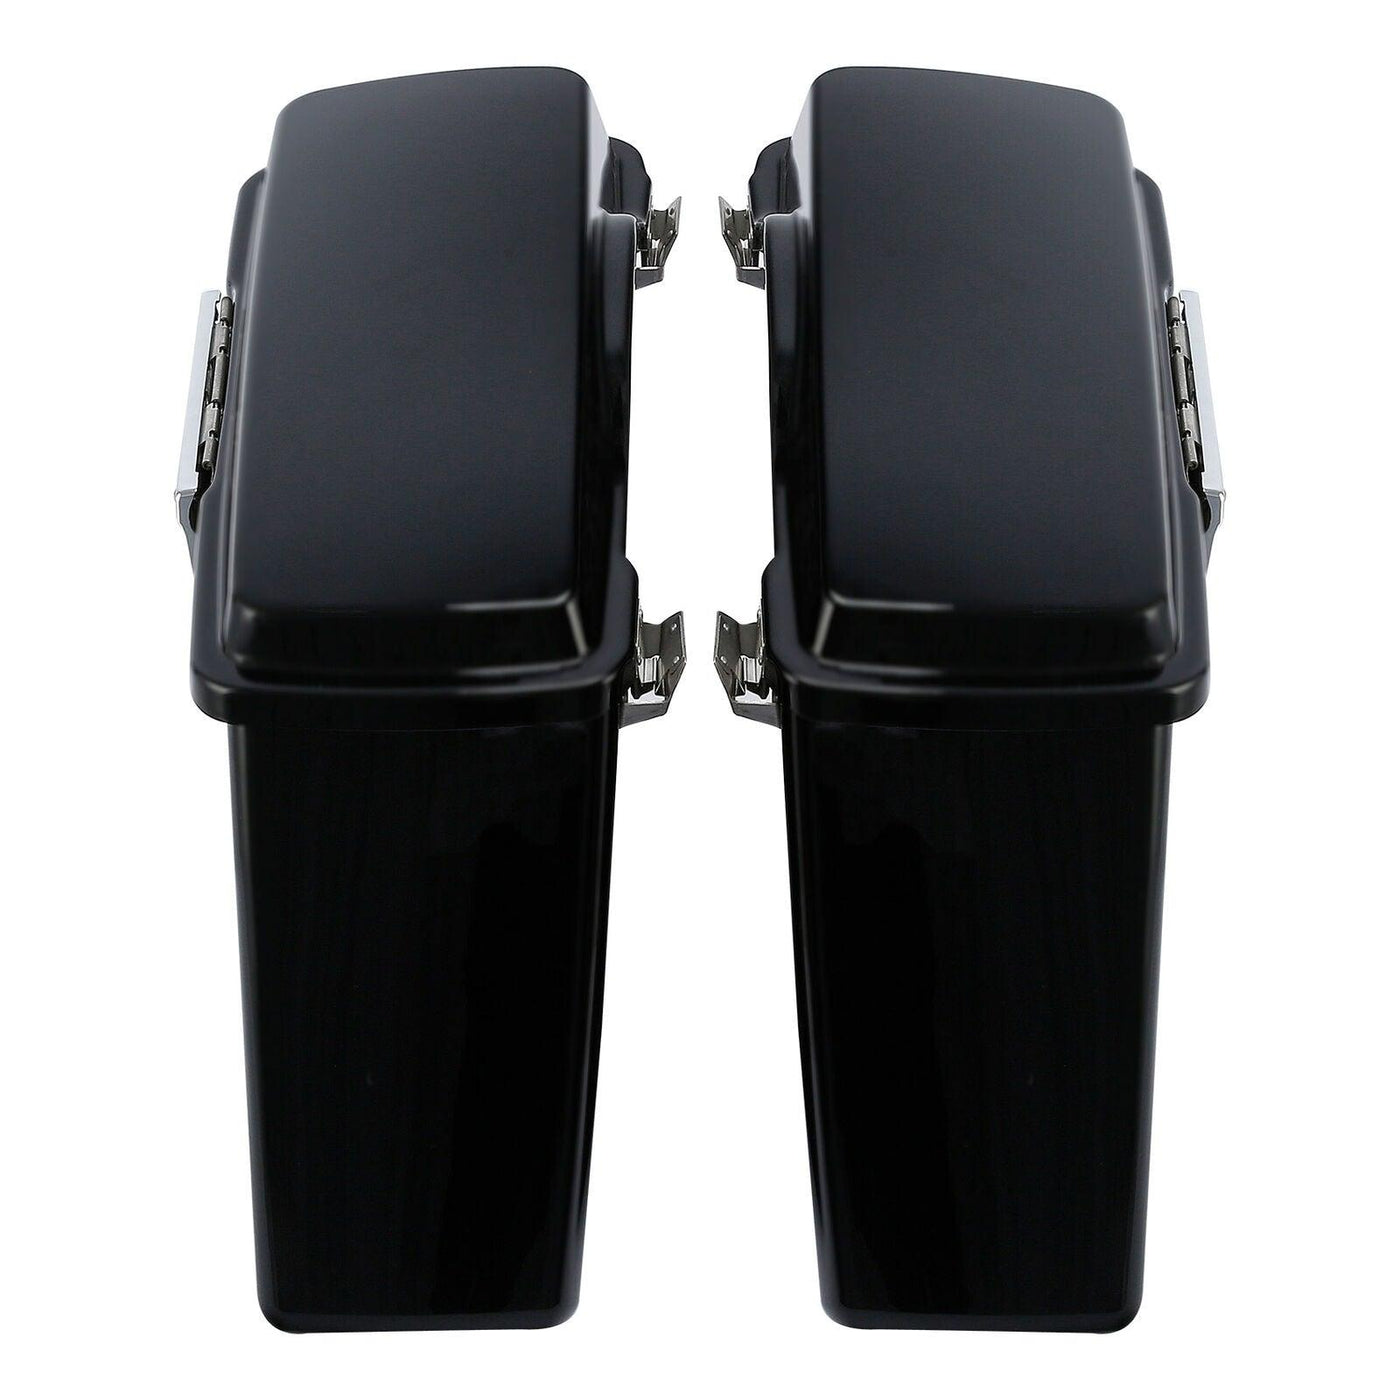 Matte Black SaddleBags w/ Latche Fit For Harley Touring Road King Glide 94-13 - Moto Life Products